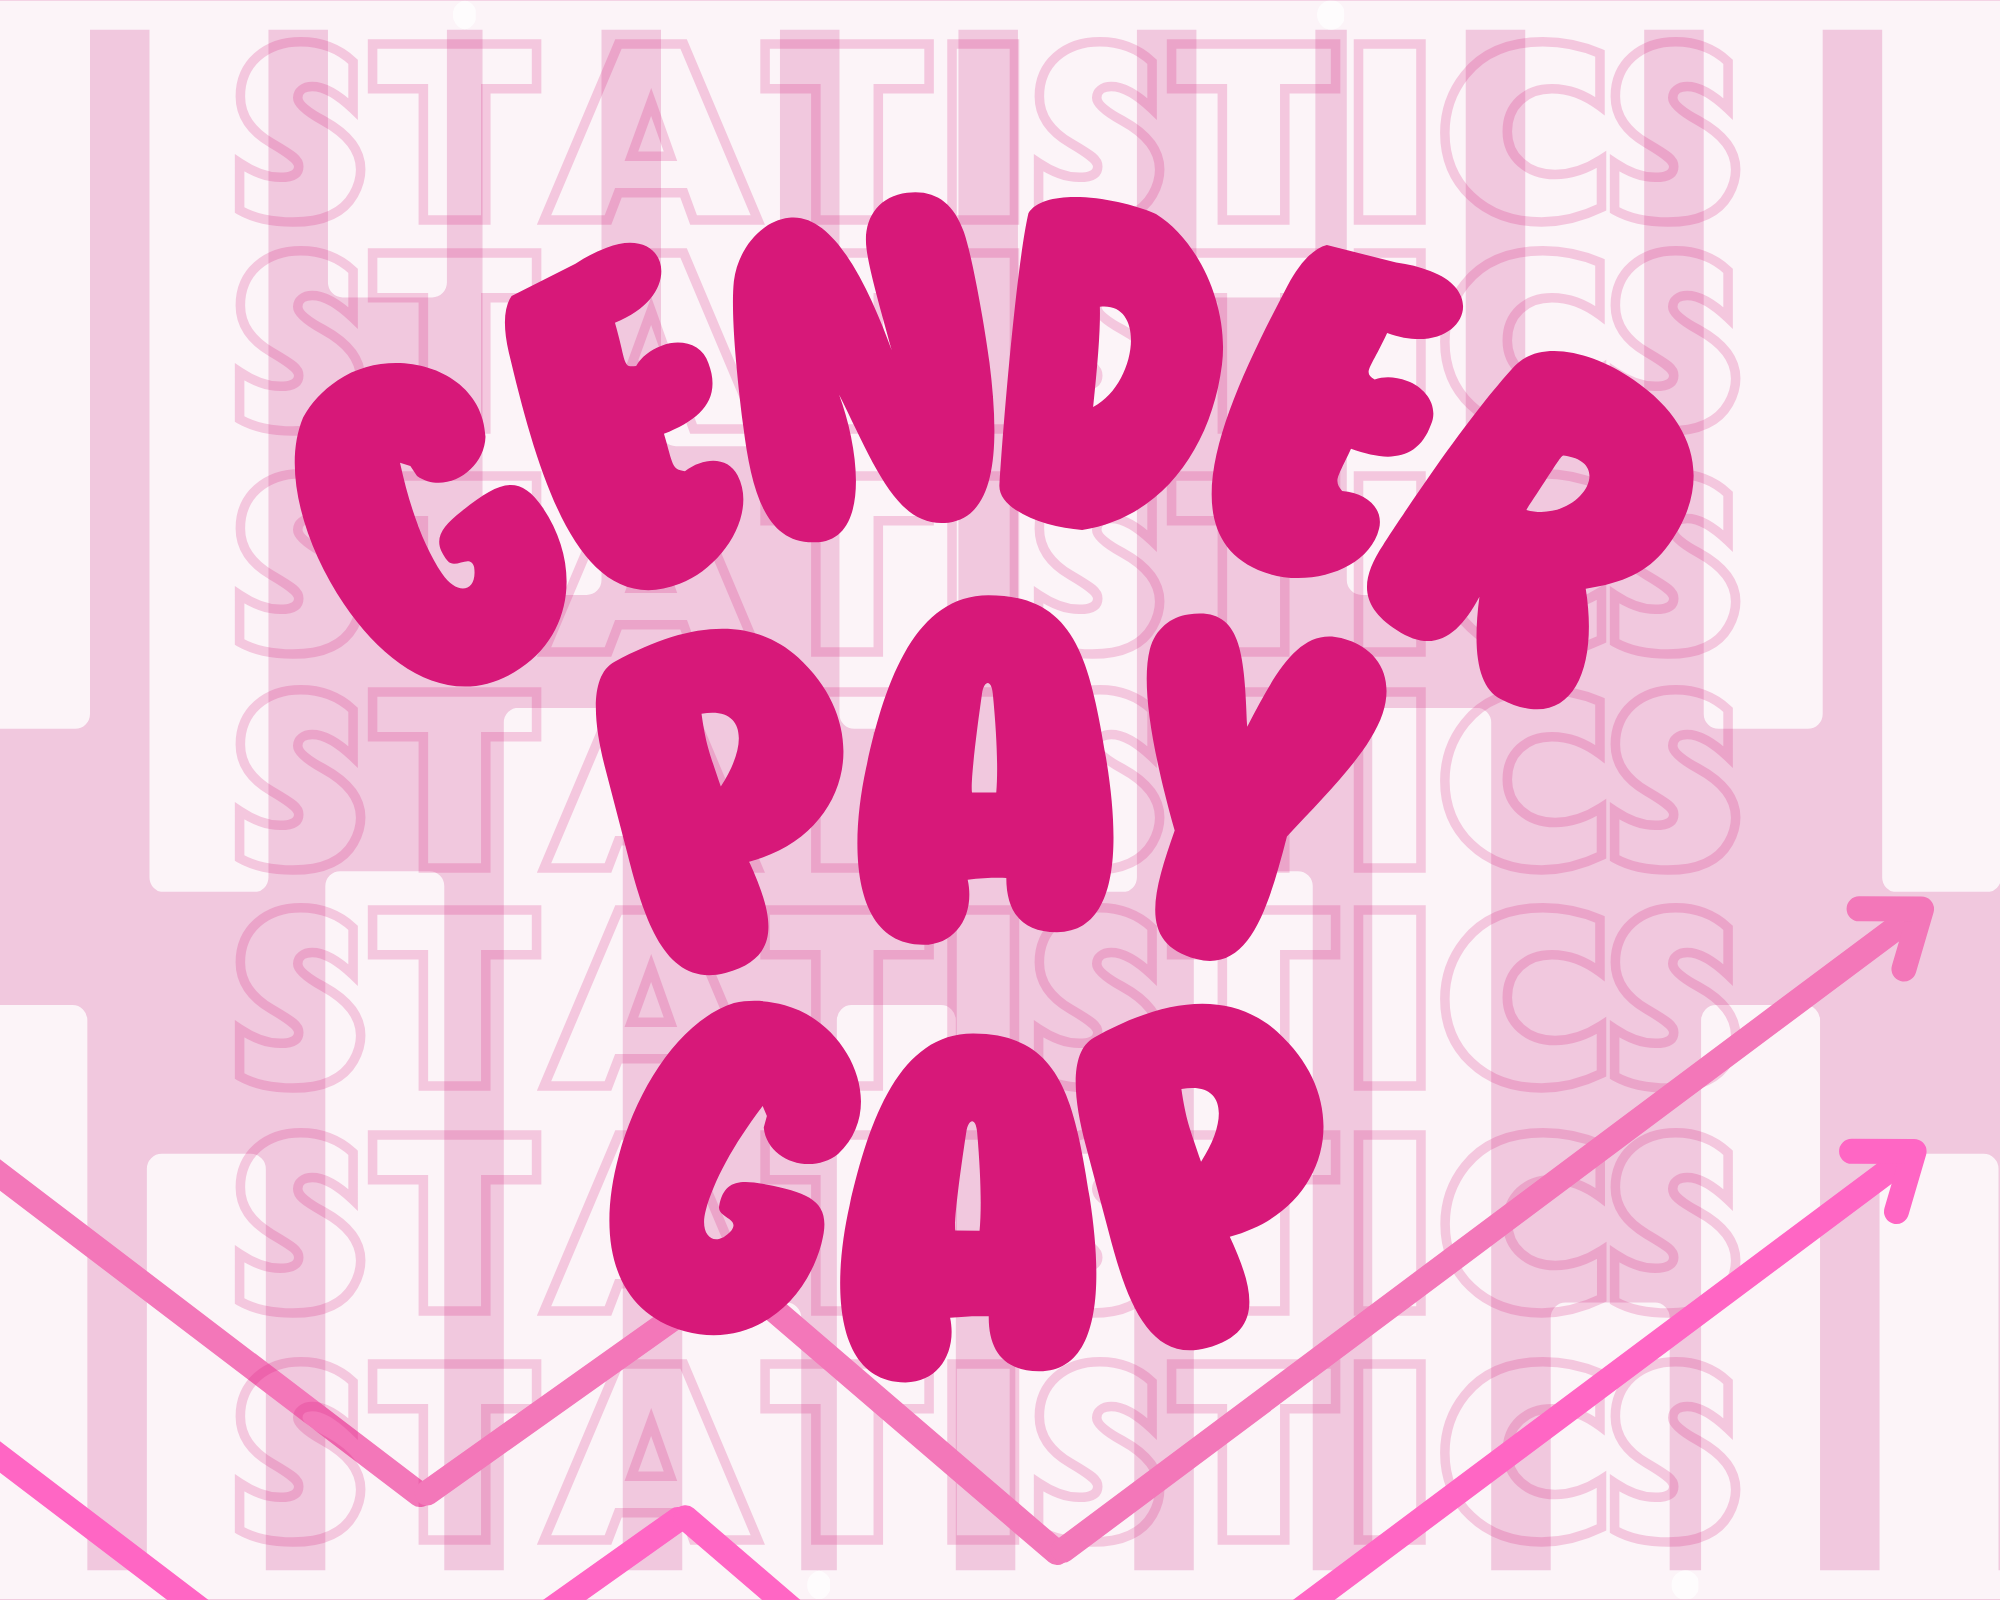 Image: gender pay gap text